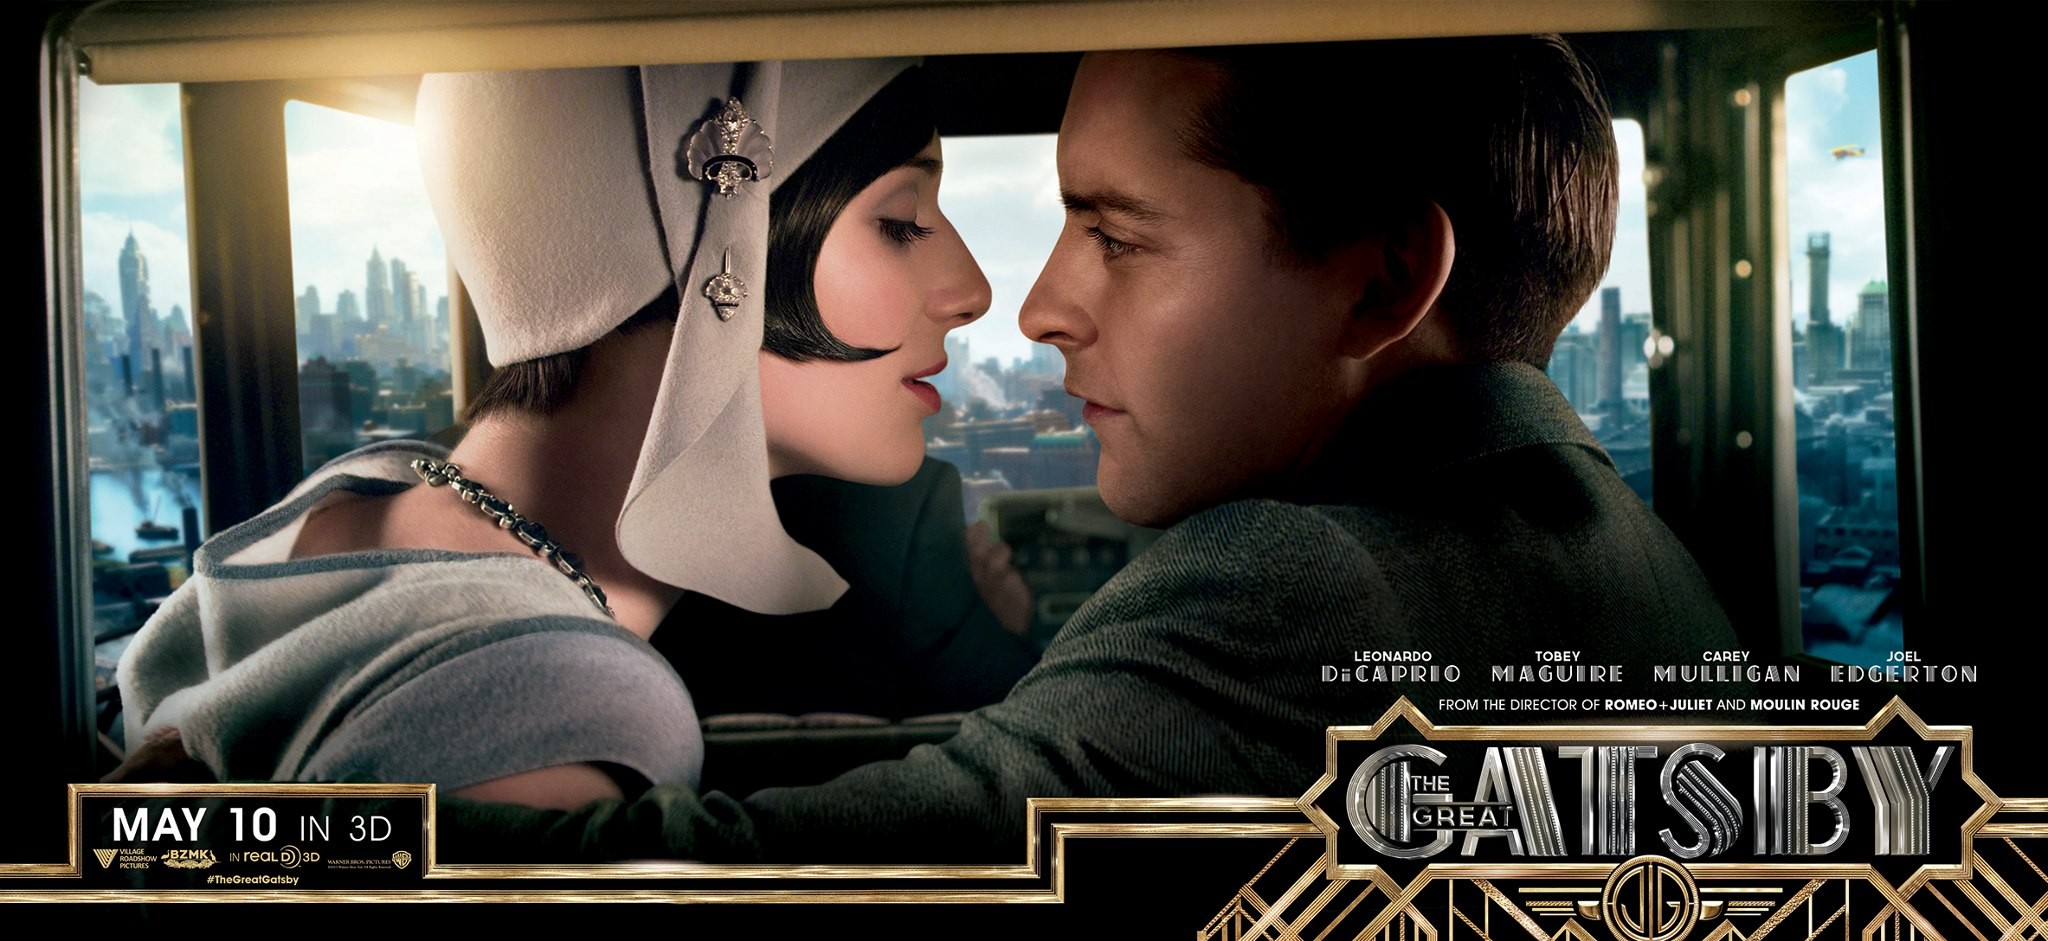 THE GREAT GATSBY international posters!2048 x 941